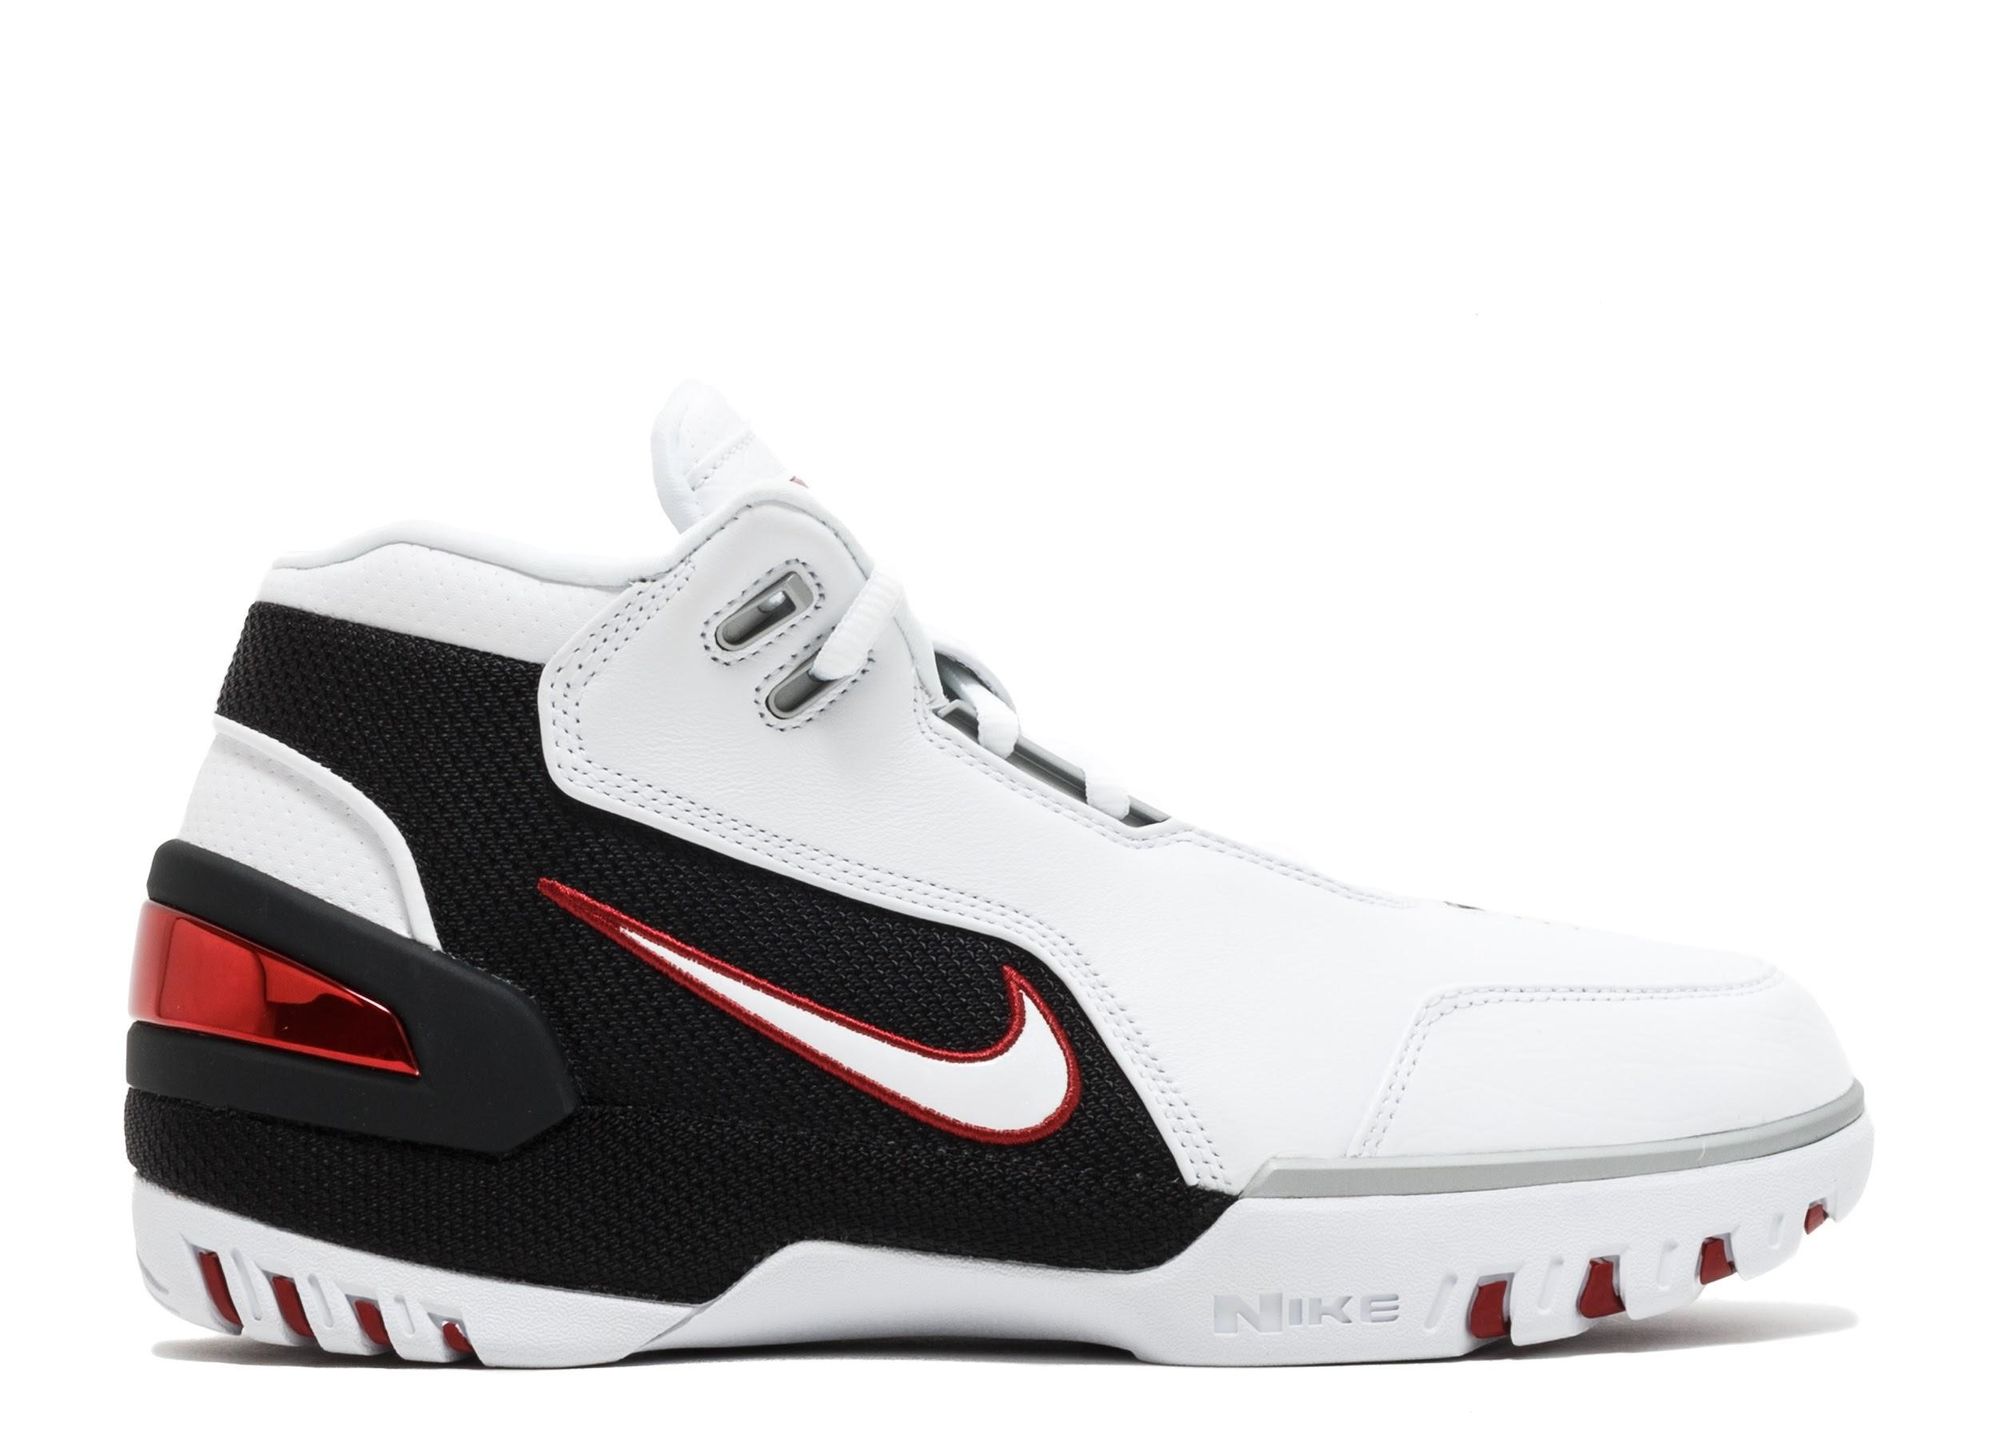 10 best basketball shoes